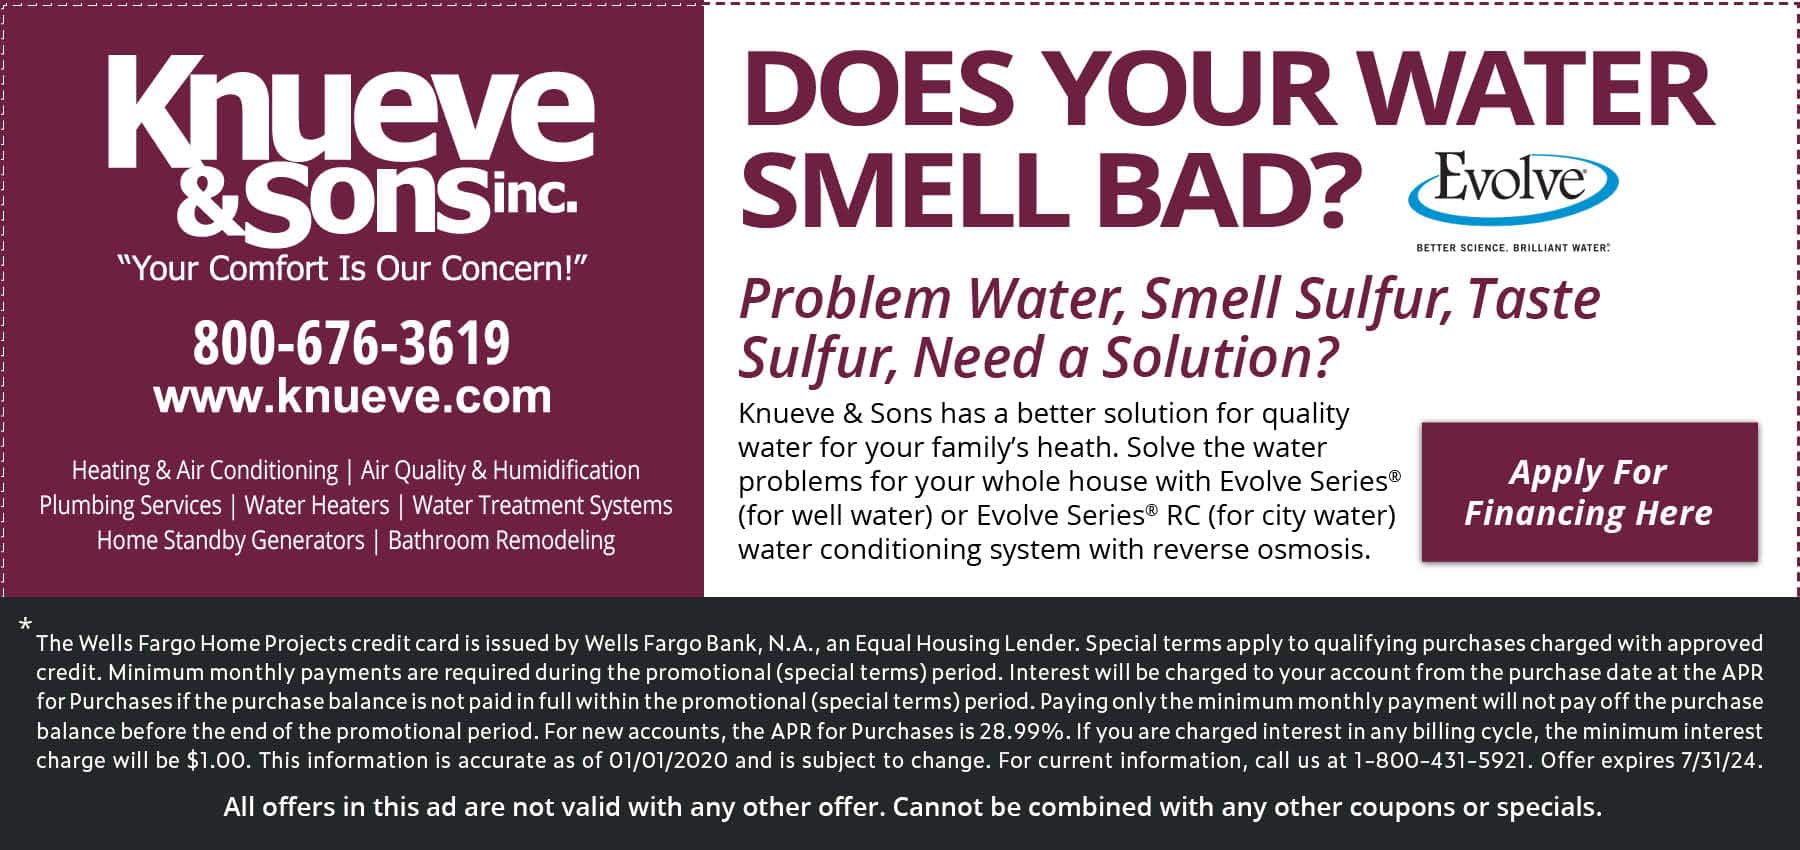 Does your water smell bad?